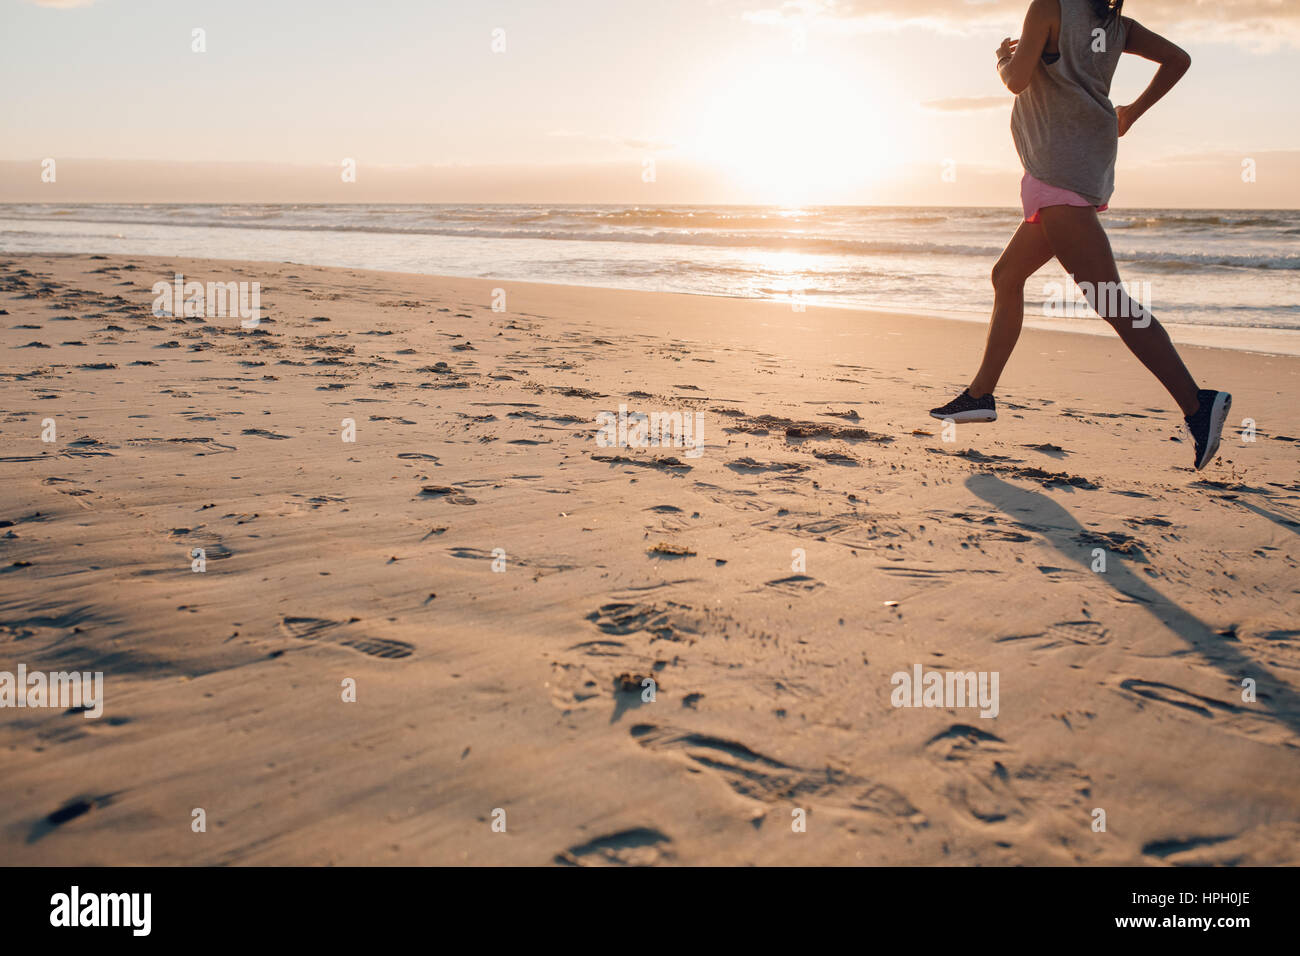 Outdoor shot of female exercising on the beach. Woman on morning run, focus on feet. Stock Photo